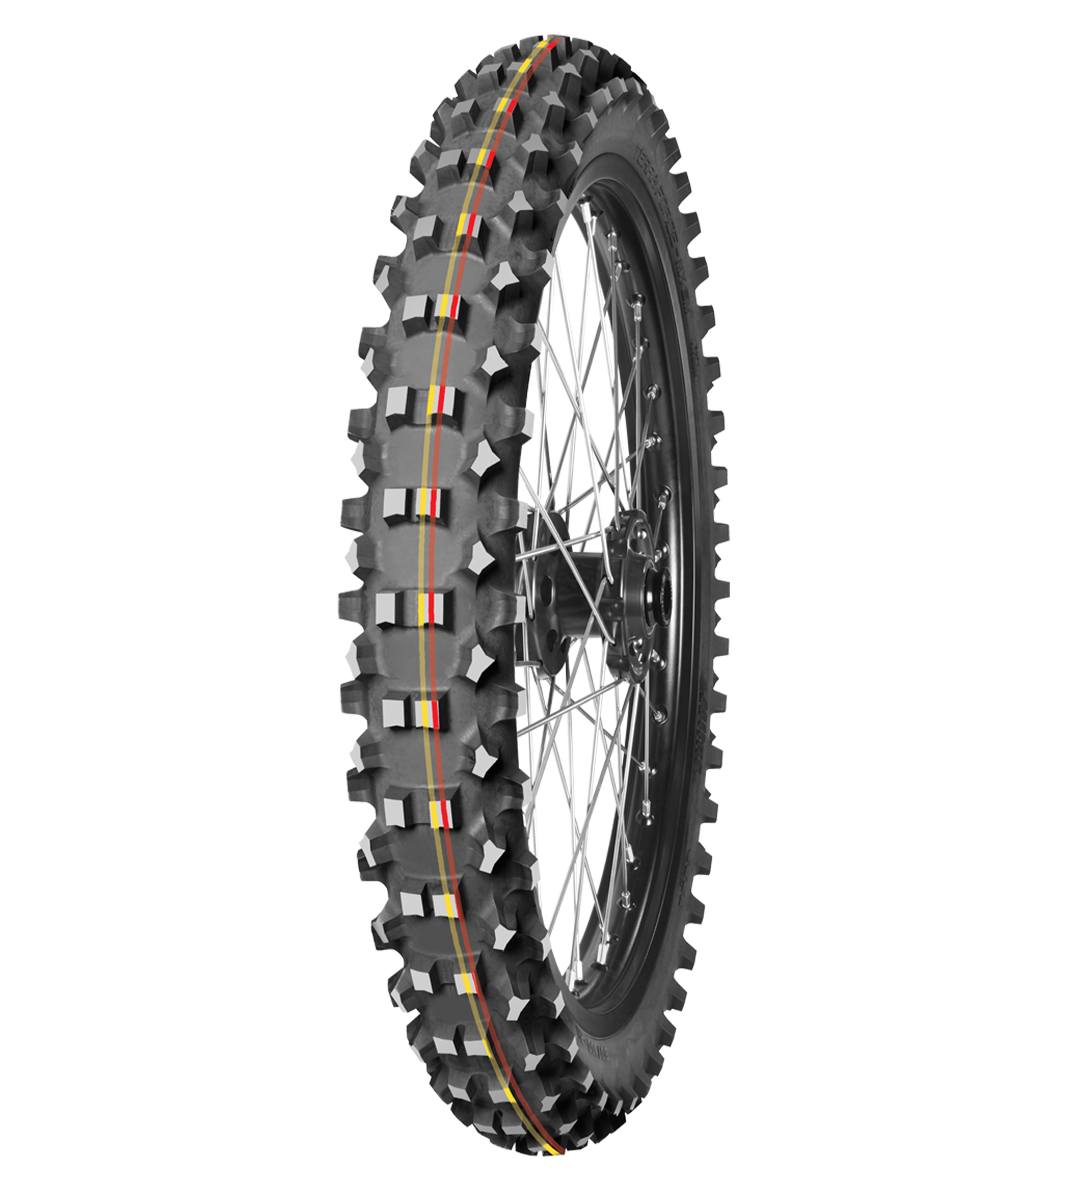 Mitas TERRA FORCE-MX SM 60/100-12 Motocross Competition Off-Road SOFT TO MEDIUM 36J Red &amp; Yellow Tube Front Tire, 226037, 60/100-12, Front, Motocross, Motocross Competition, Off-Road, Terra Force, Terra Force-MX SM, Trail, Tires - Imported and distributed in North &amp; South America by Lindeco Genuine Powersports - Premier Powersports Equipment and Accessories for Motorcycle Enthusiasts, Professional Riders and Dealers.